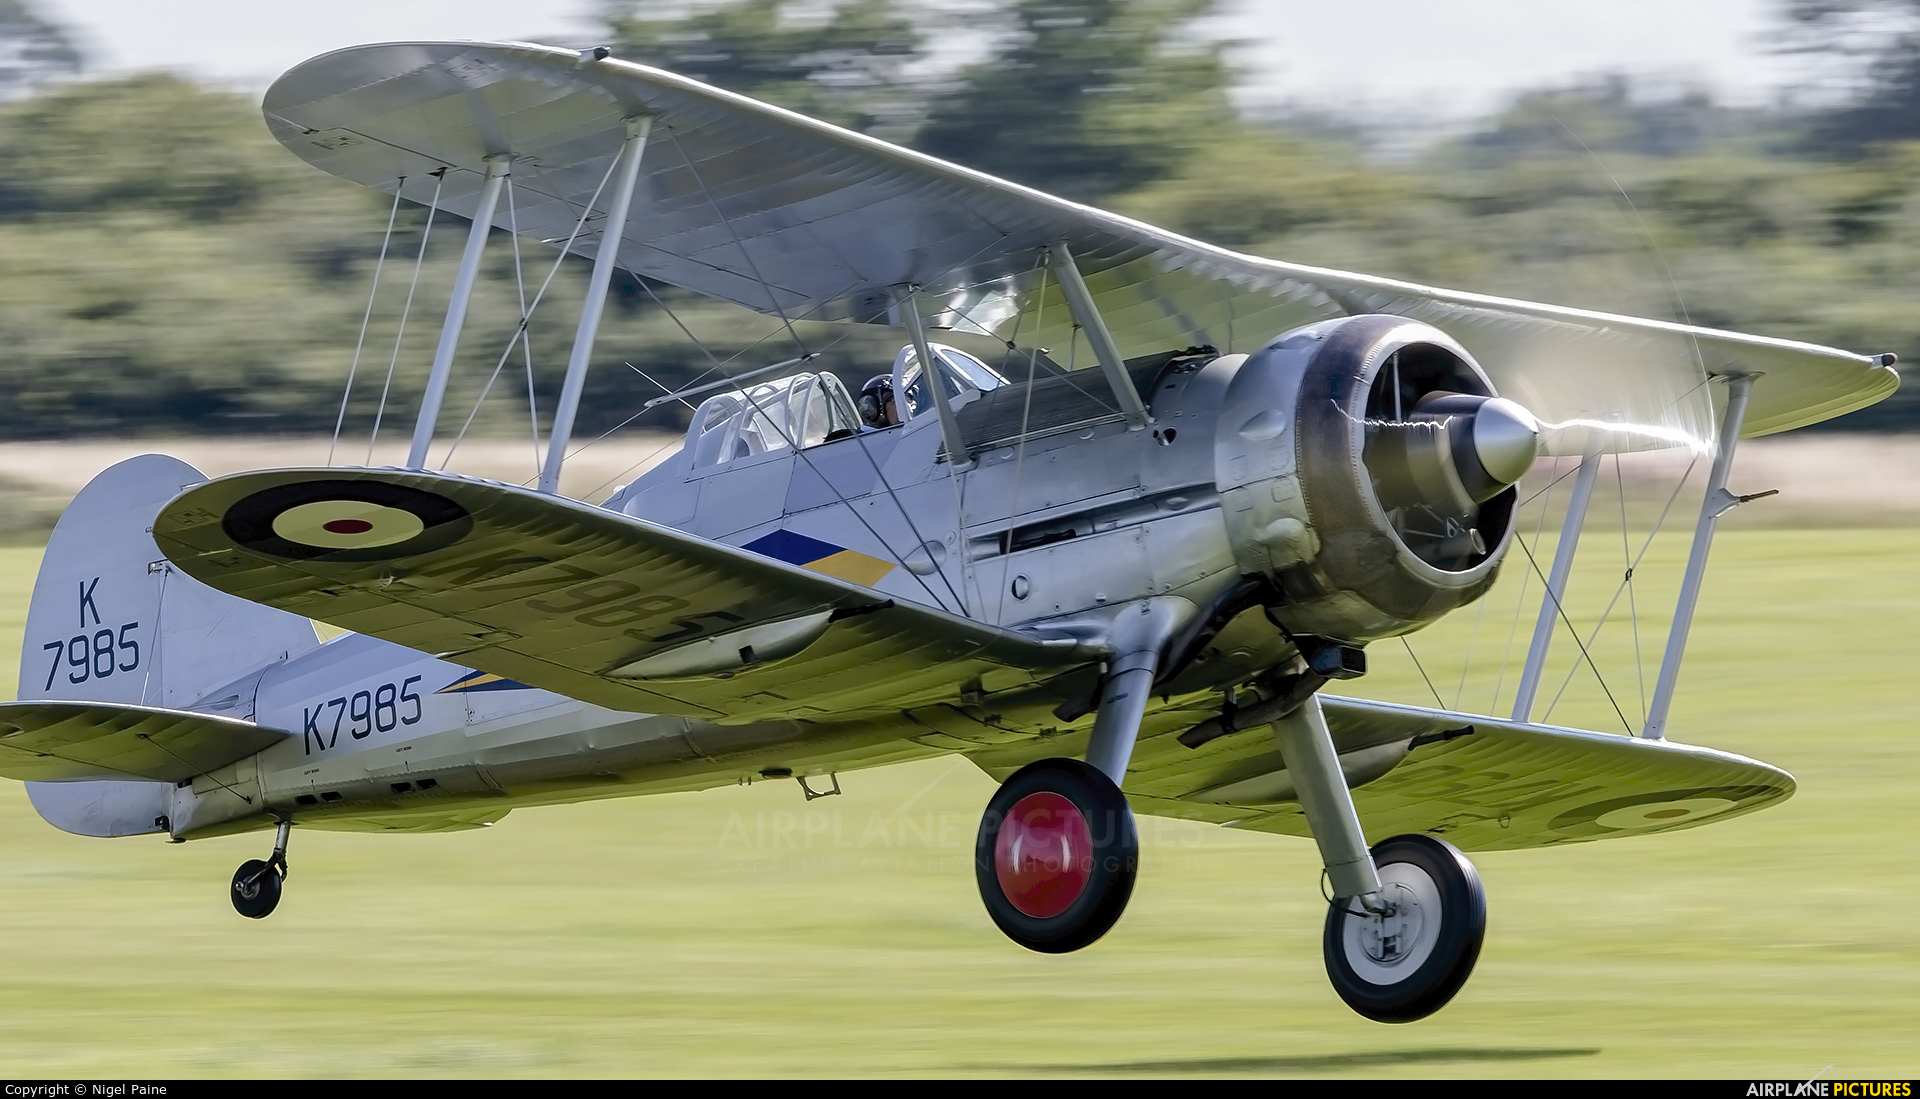 The Shuttleworth Collection G-AMRK aircraft at Old Warden